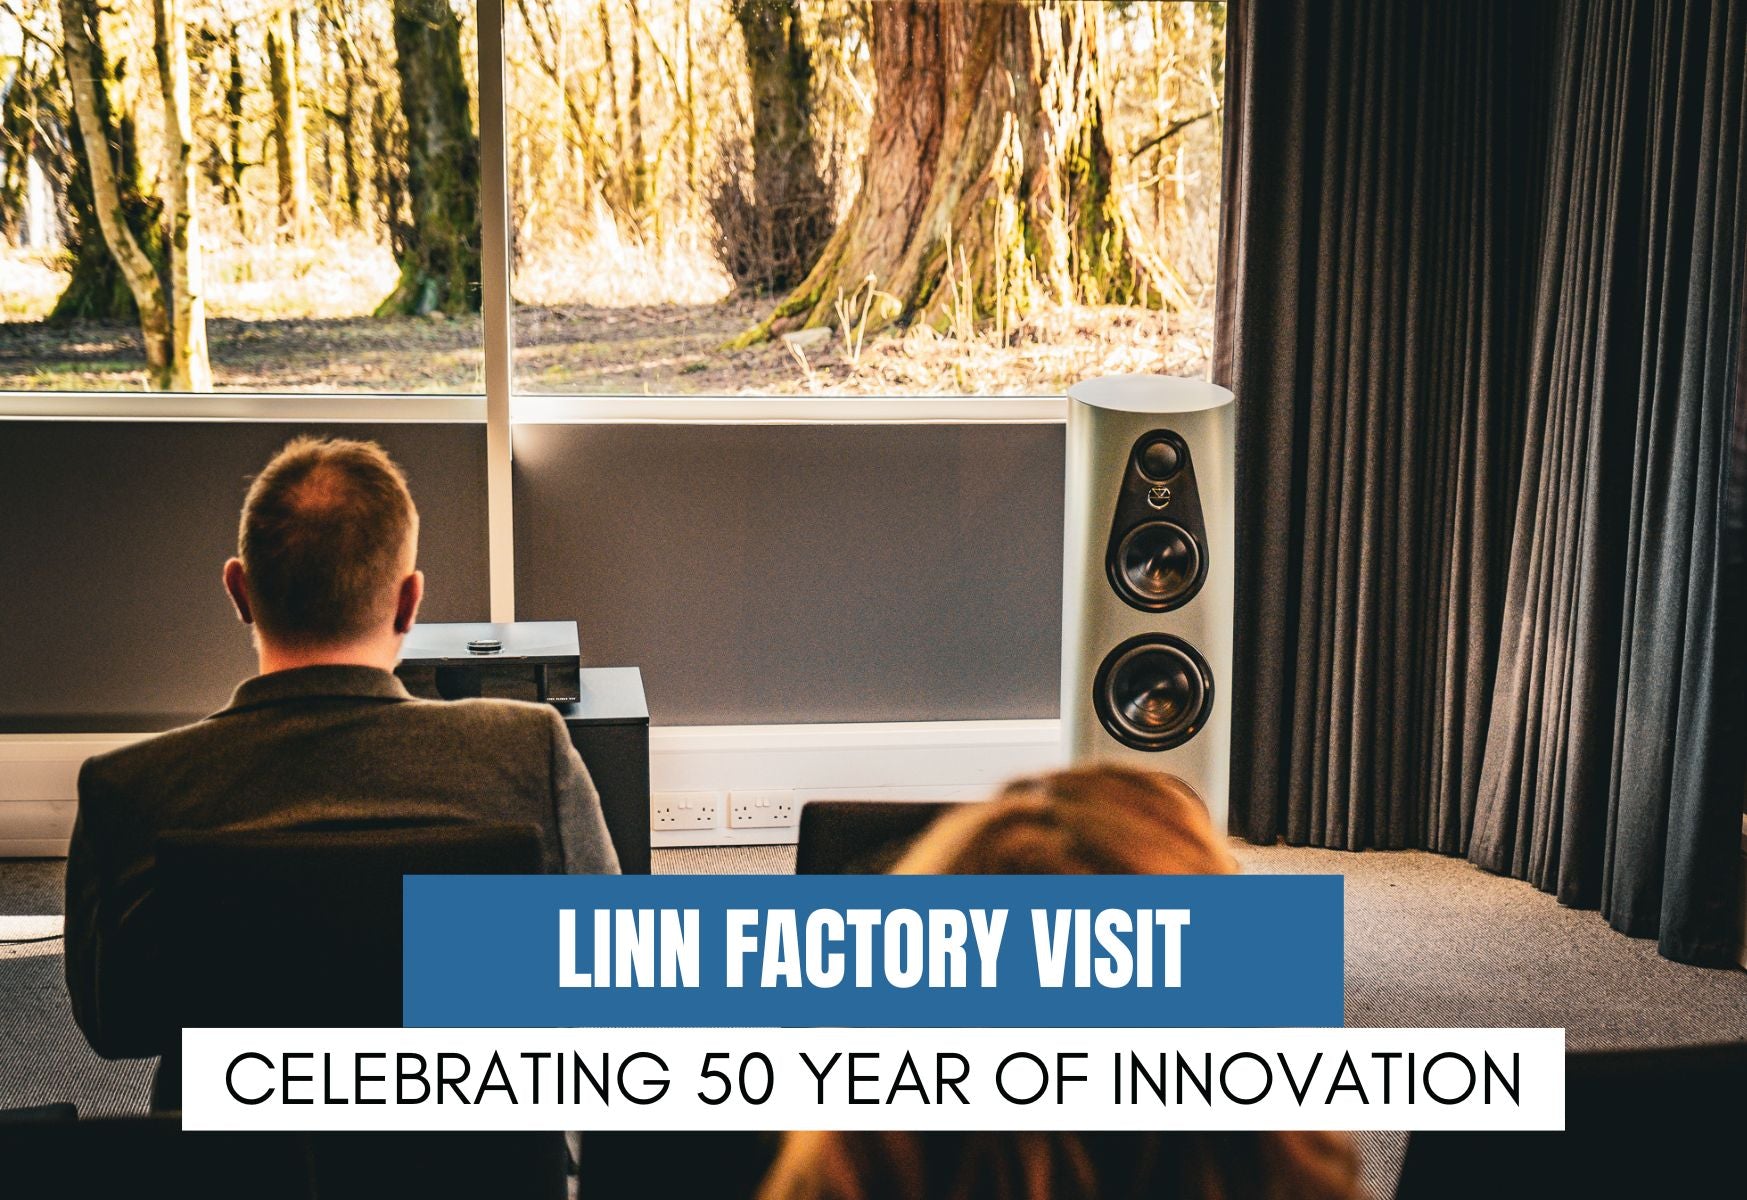 A Celebration of 50 Years of Innovation - Linn Factory Visit